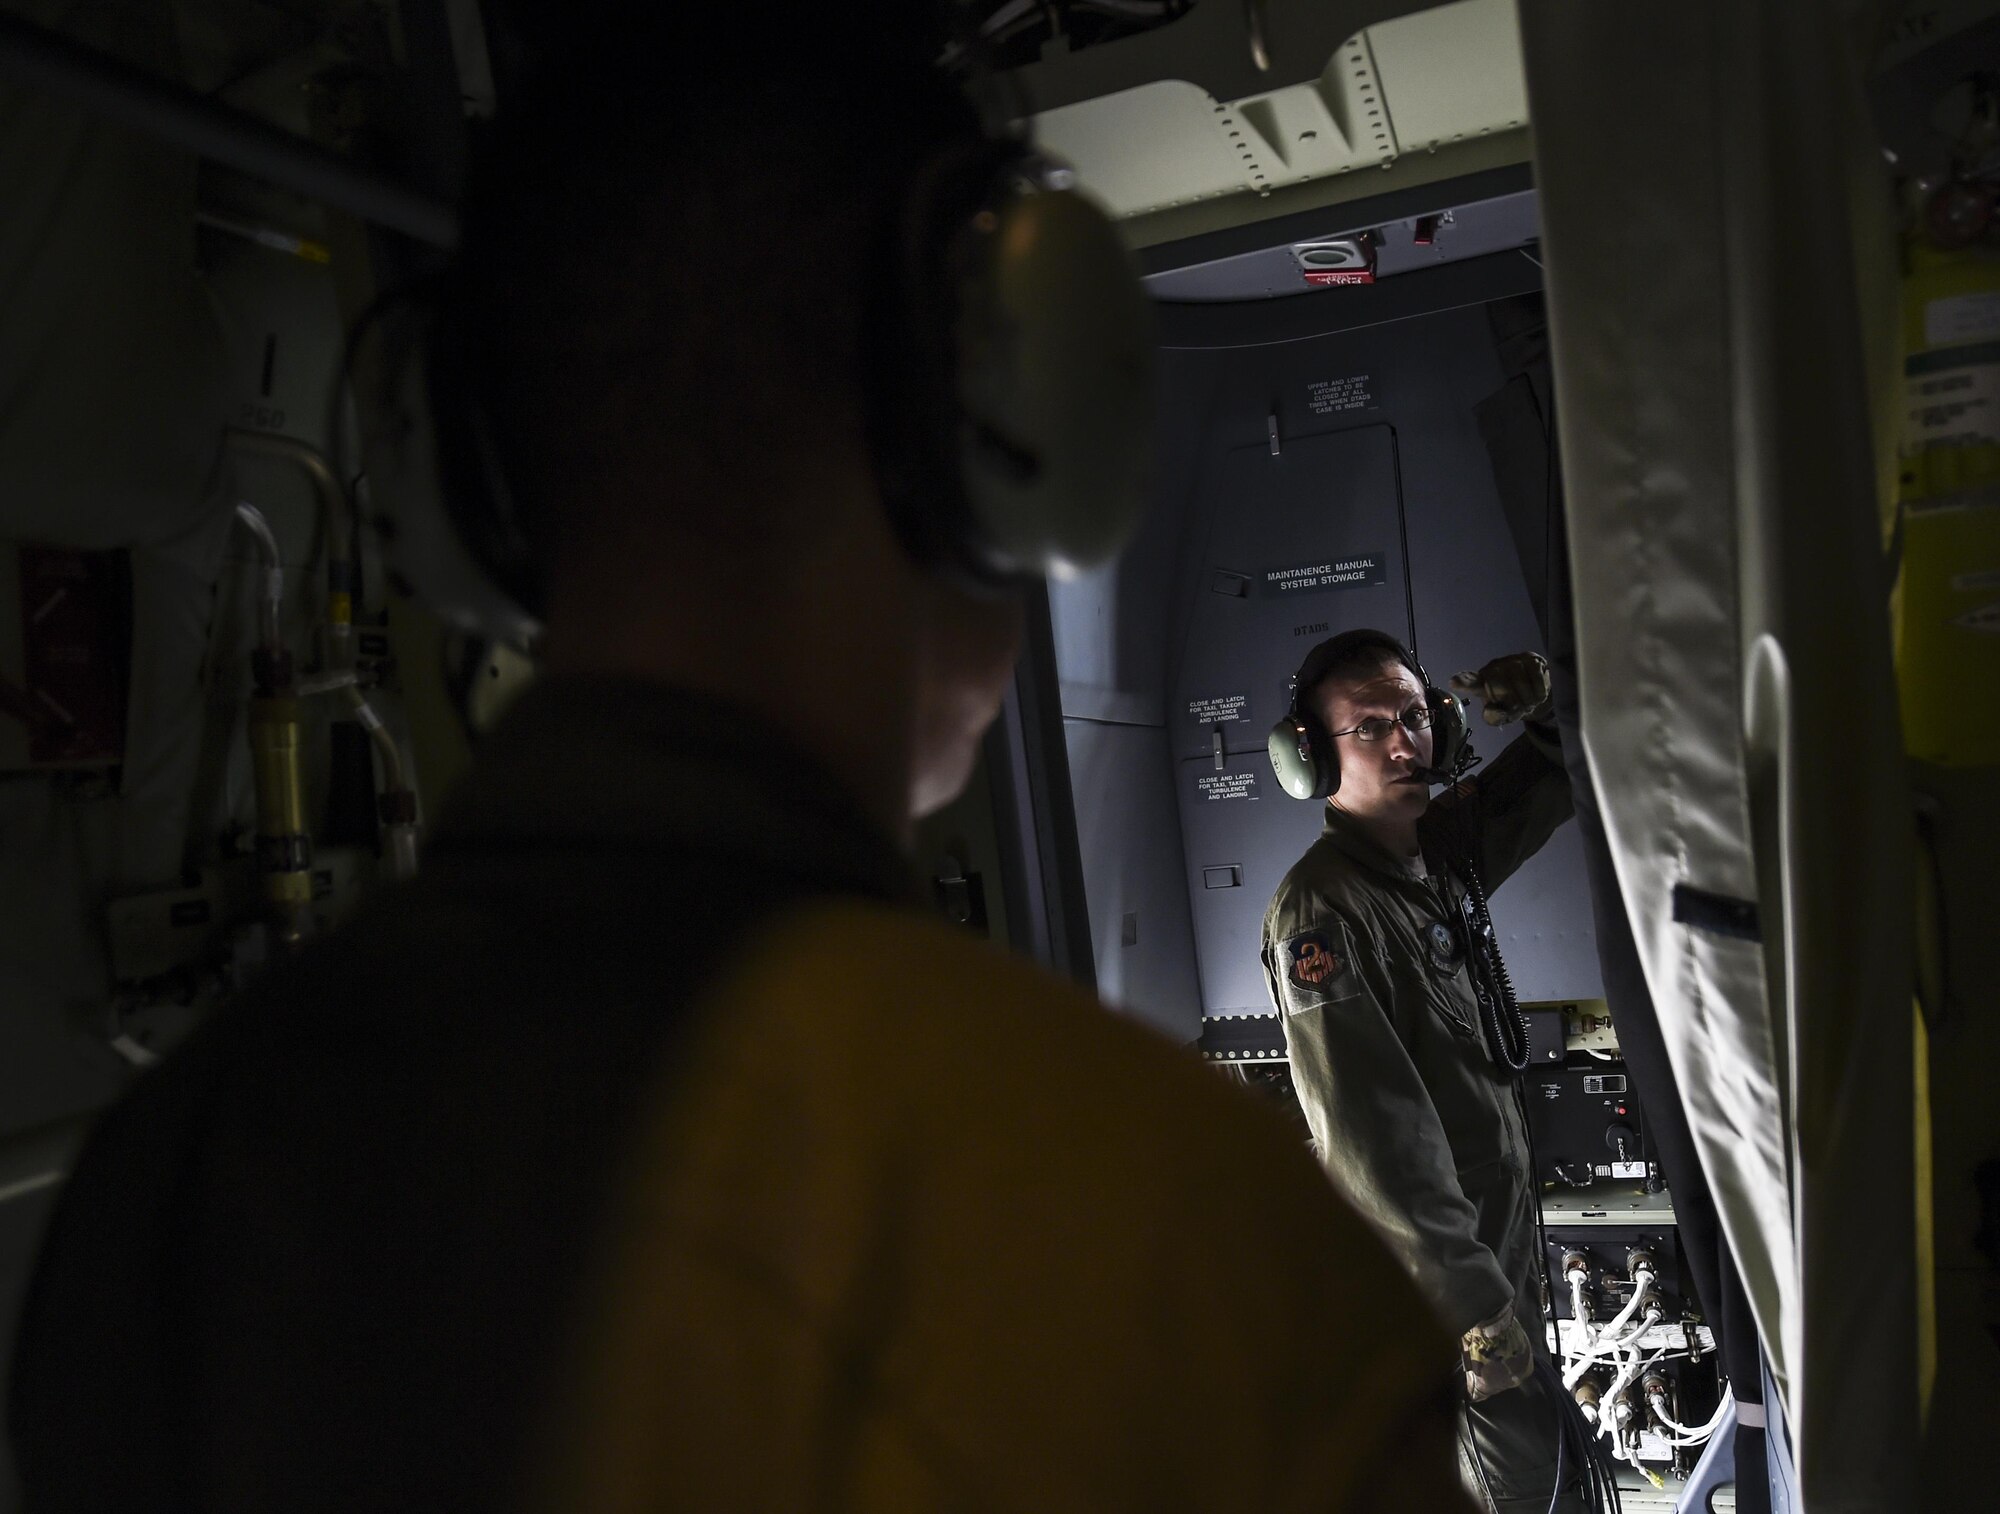 Staff Sgts. Oscar Garcia and Derek Watson, special mission aviators with the 1st Special Operations Group Detachment 2, communicate during preflight checks of an MC-130J Combat Talon II at Lockheed Martin in Marietta, Ga. Dec. 11, 2015. The MC-130J will undergo modifications to become an AC-130J Ghostrider, which will provide the 1 SOW with close air support and air interdiction capabilities. (U.S. Air Force photo by Senior Airman Ryan Conroy)